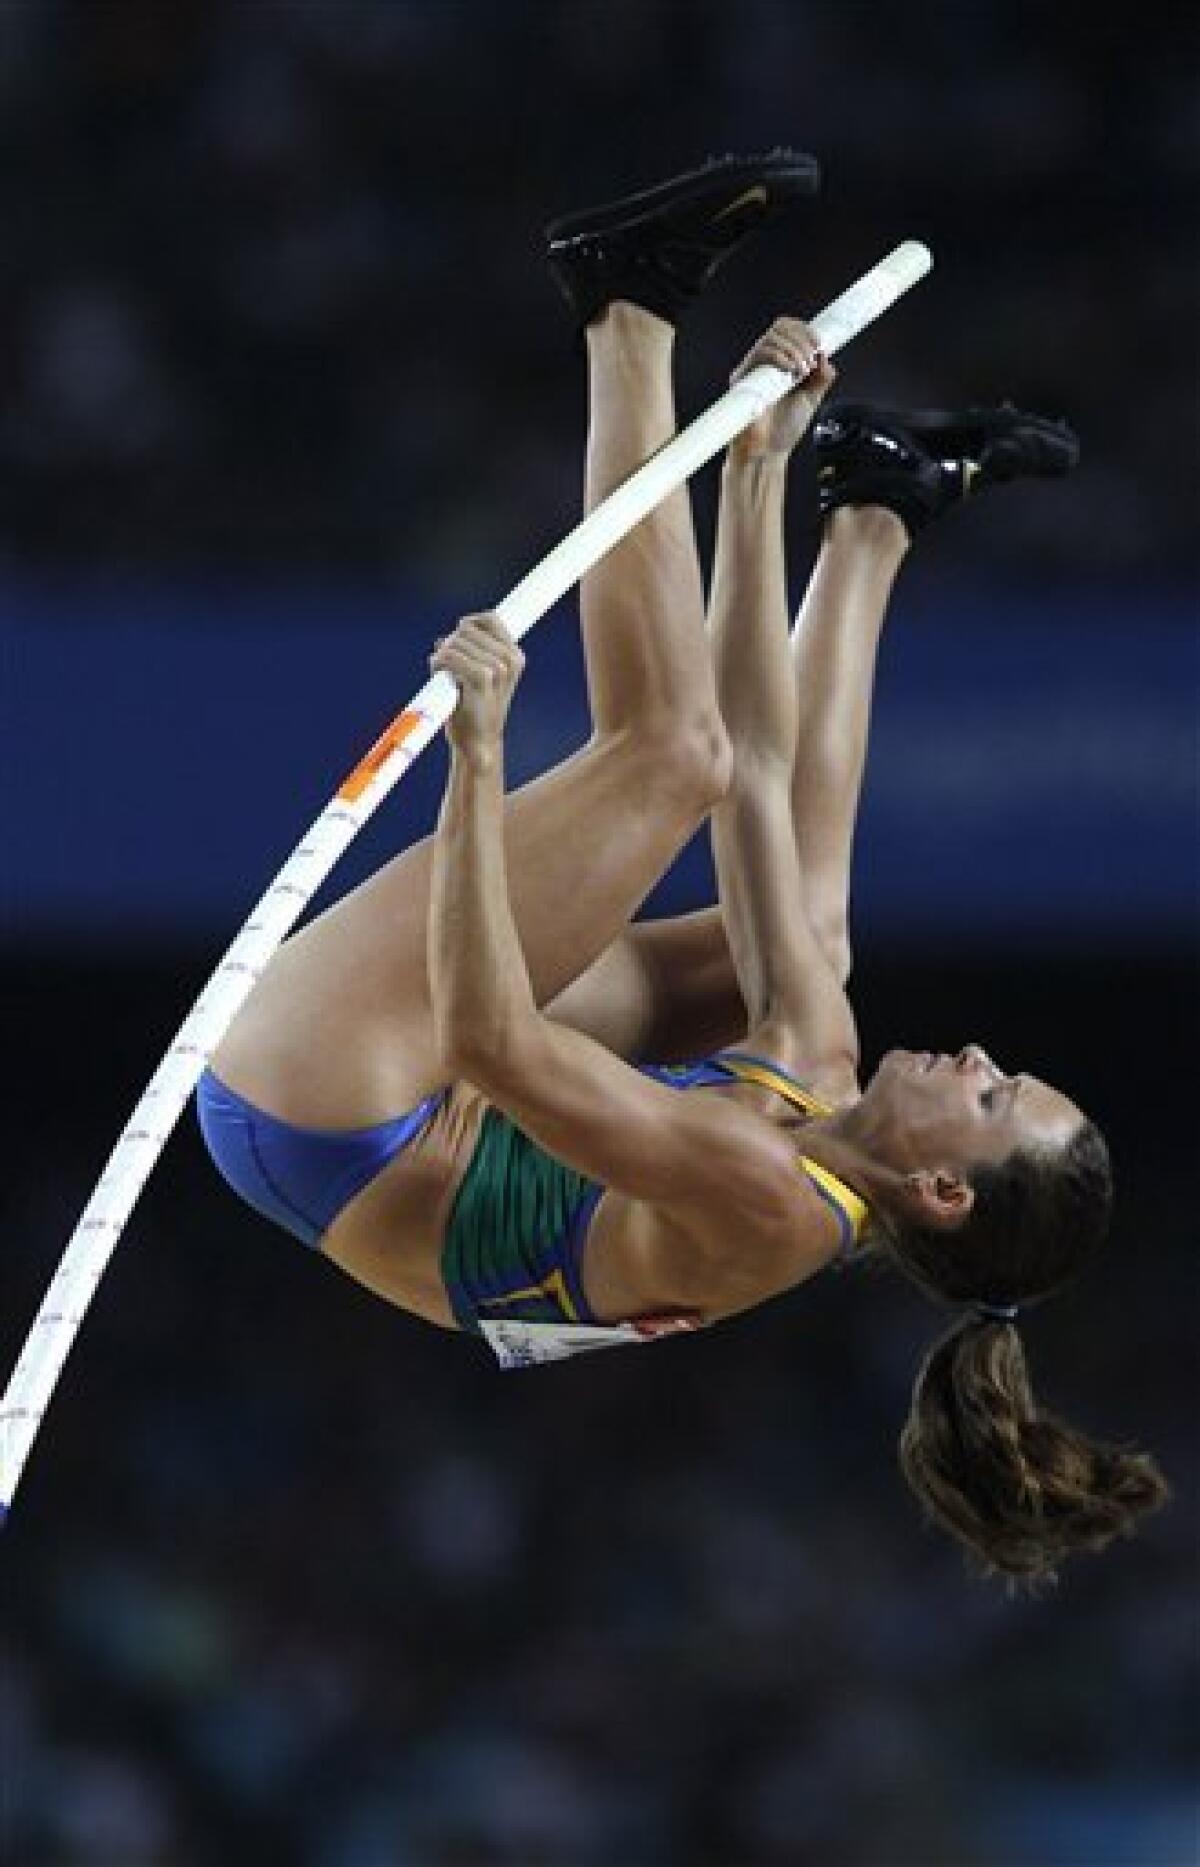 Brazil's Fabiana Murer makes an attempt in the Women's Pole Vault final at the World Athletics Championships in Daegu, South Korea, Tuesday, Aug. 30, 2011. (AP Photo/Kin Cheung)